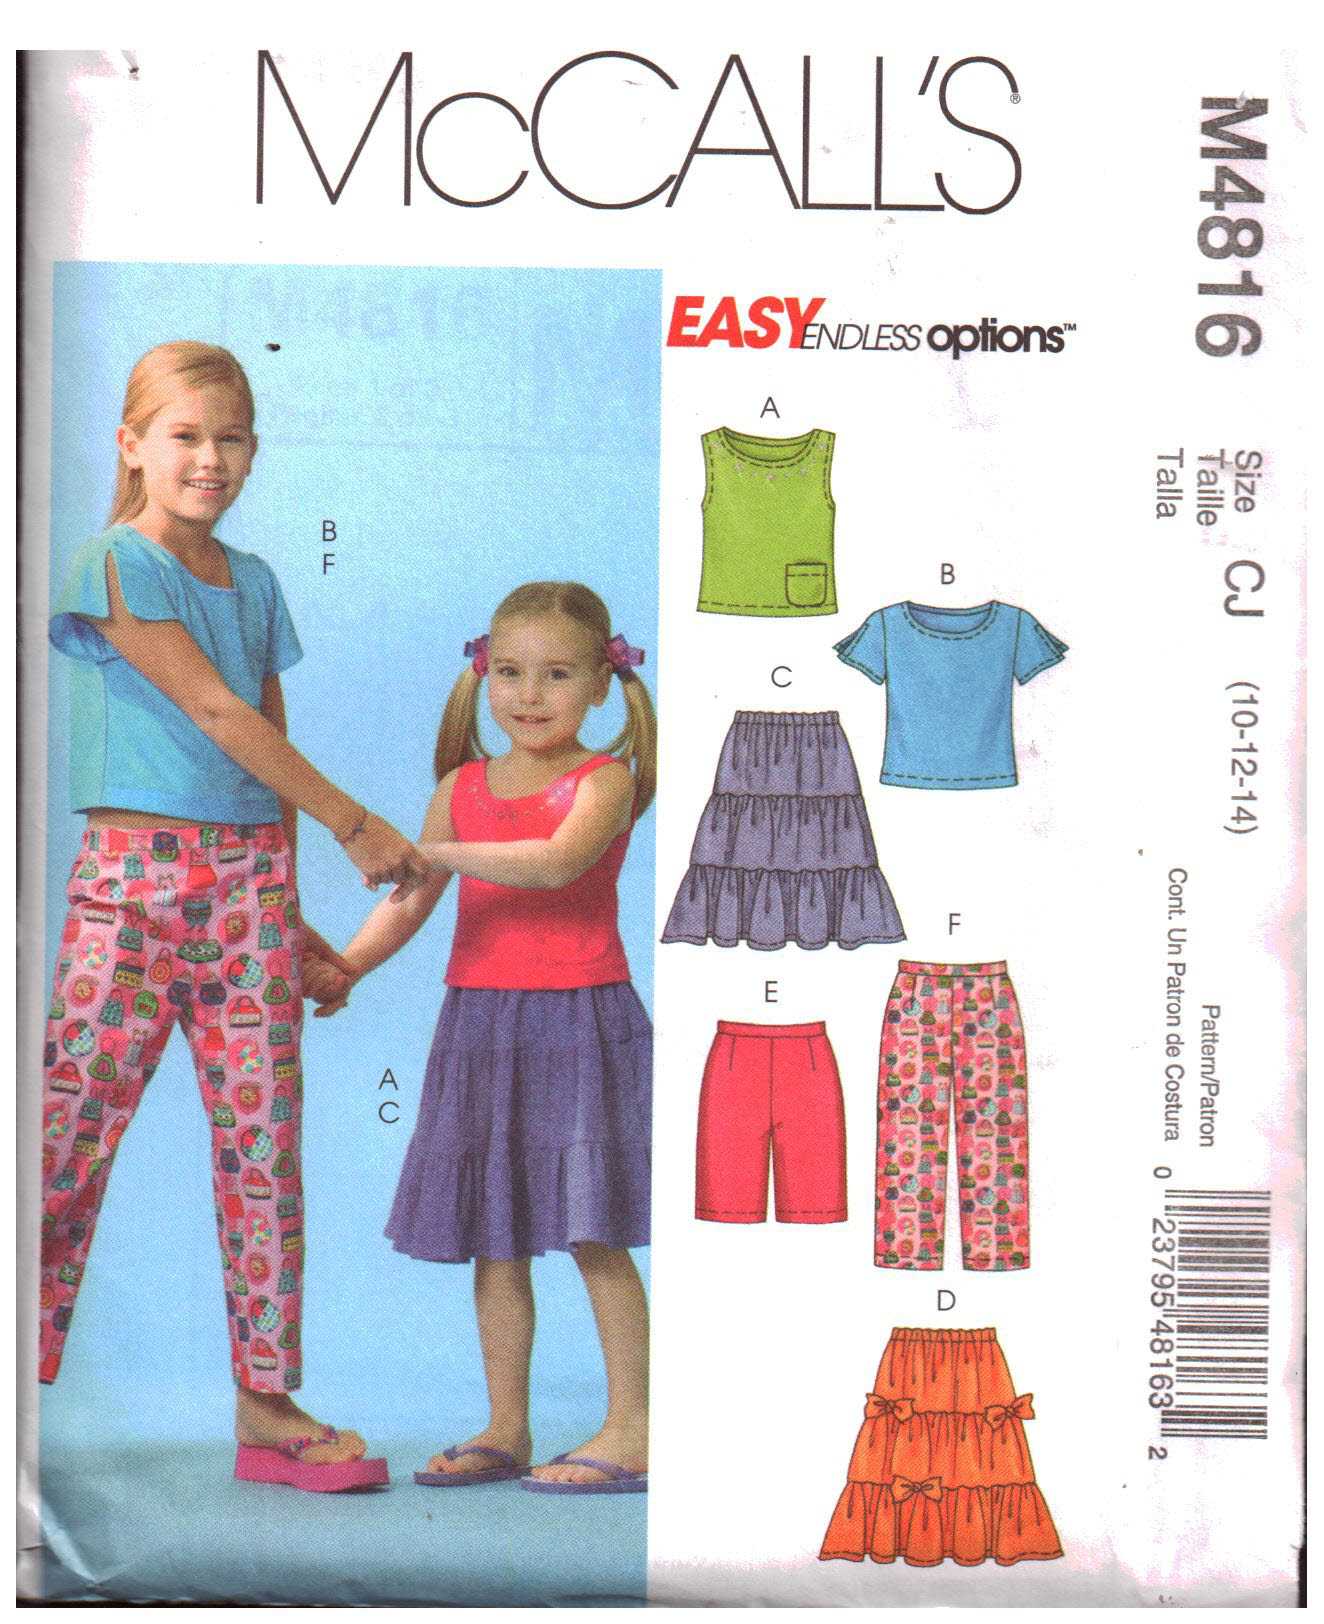 McCall's M4816 Girl's Tops, Skirts, Shorts, Capri Pants Size: CJ 10-12-14  Used Sewing Pattern